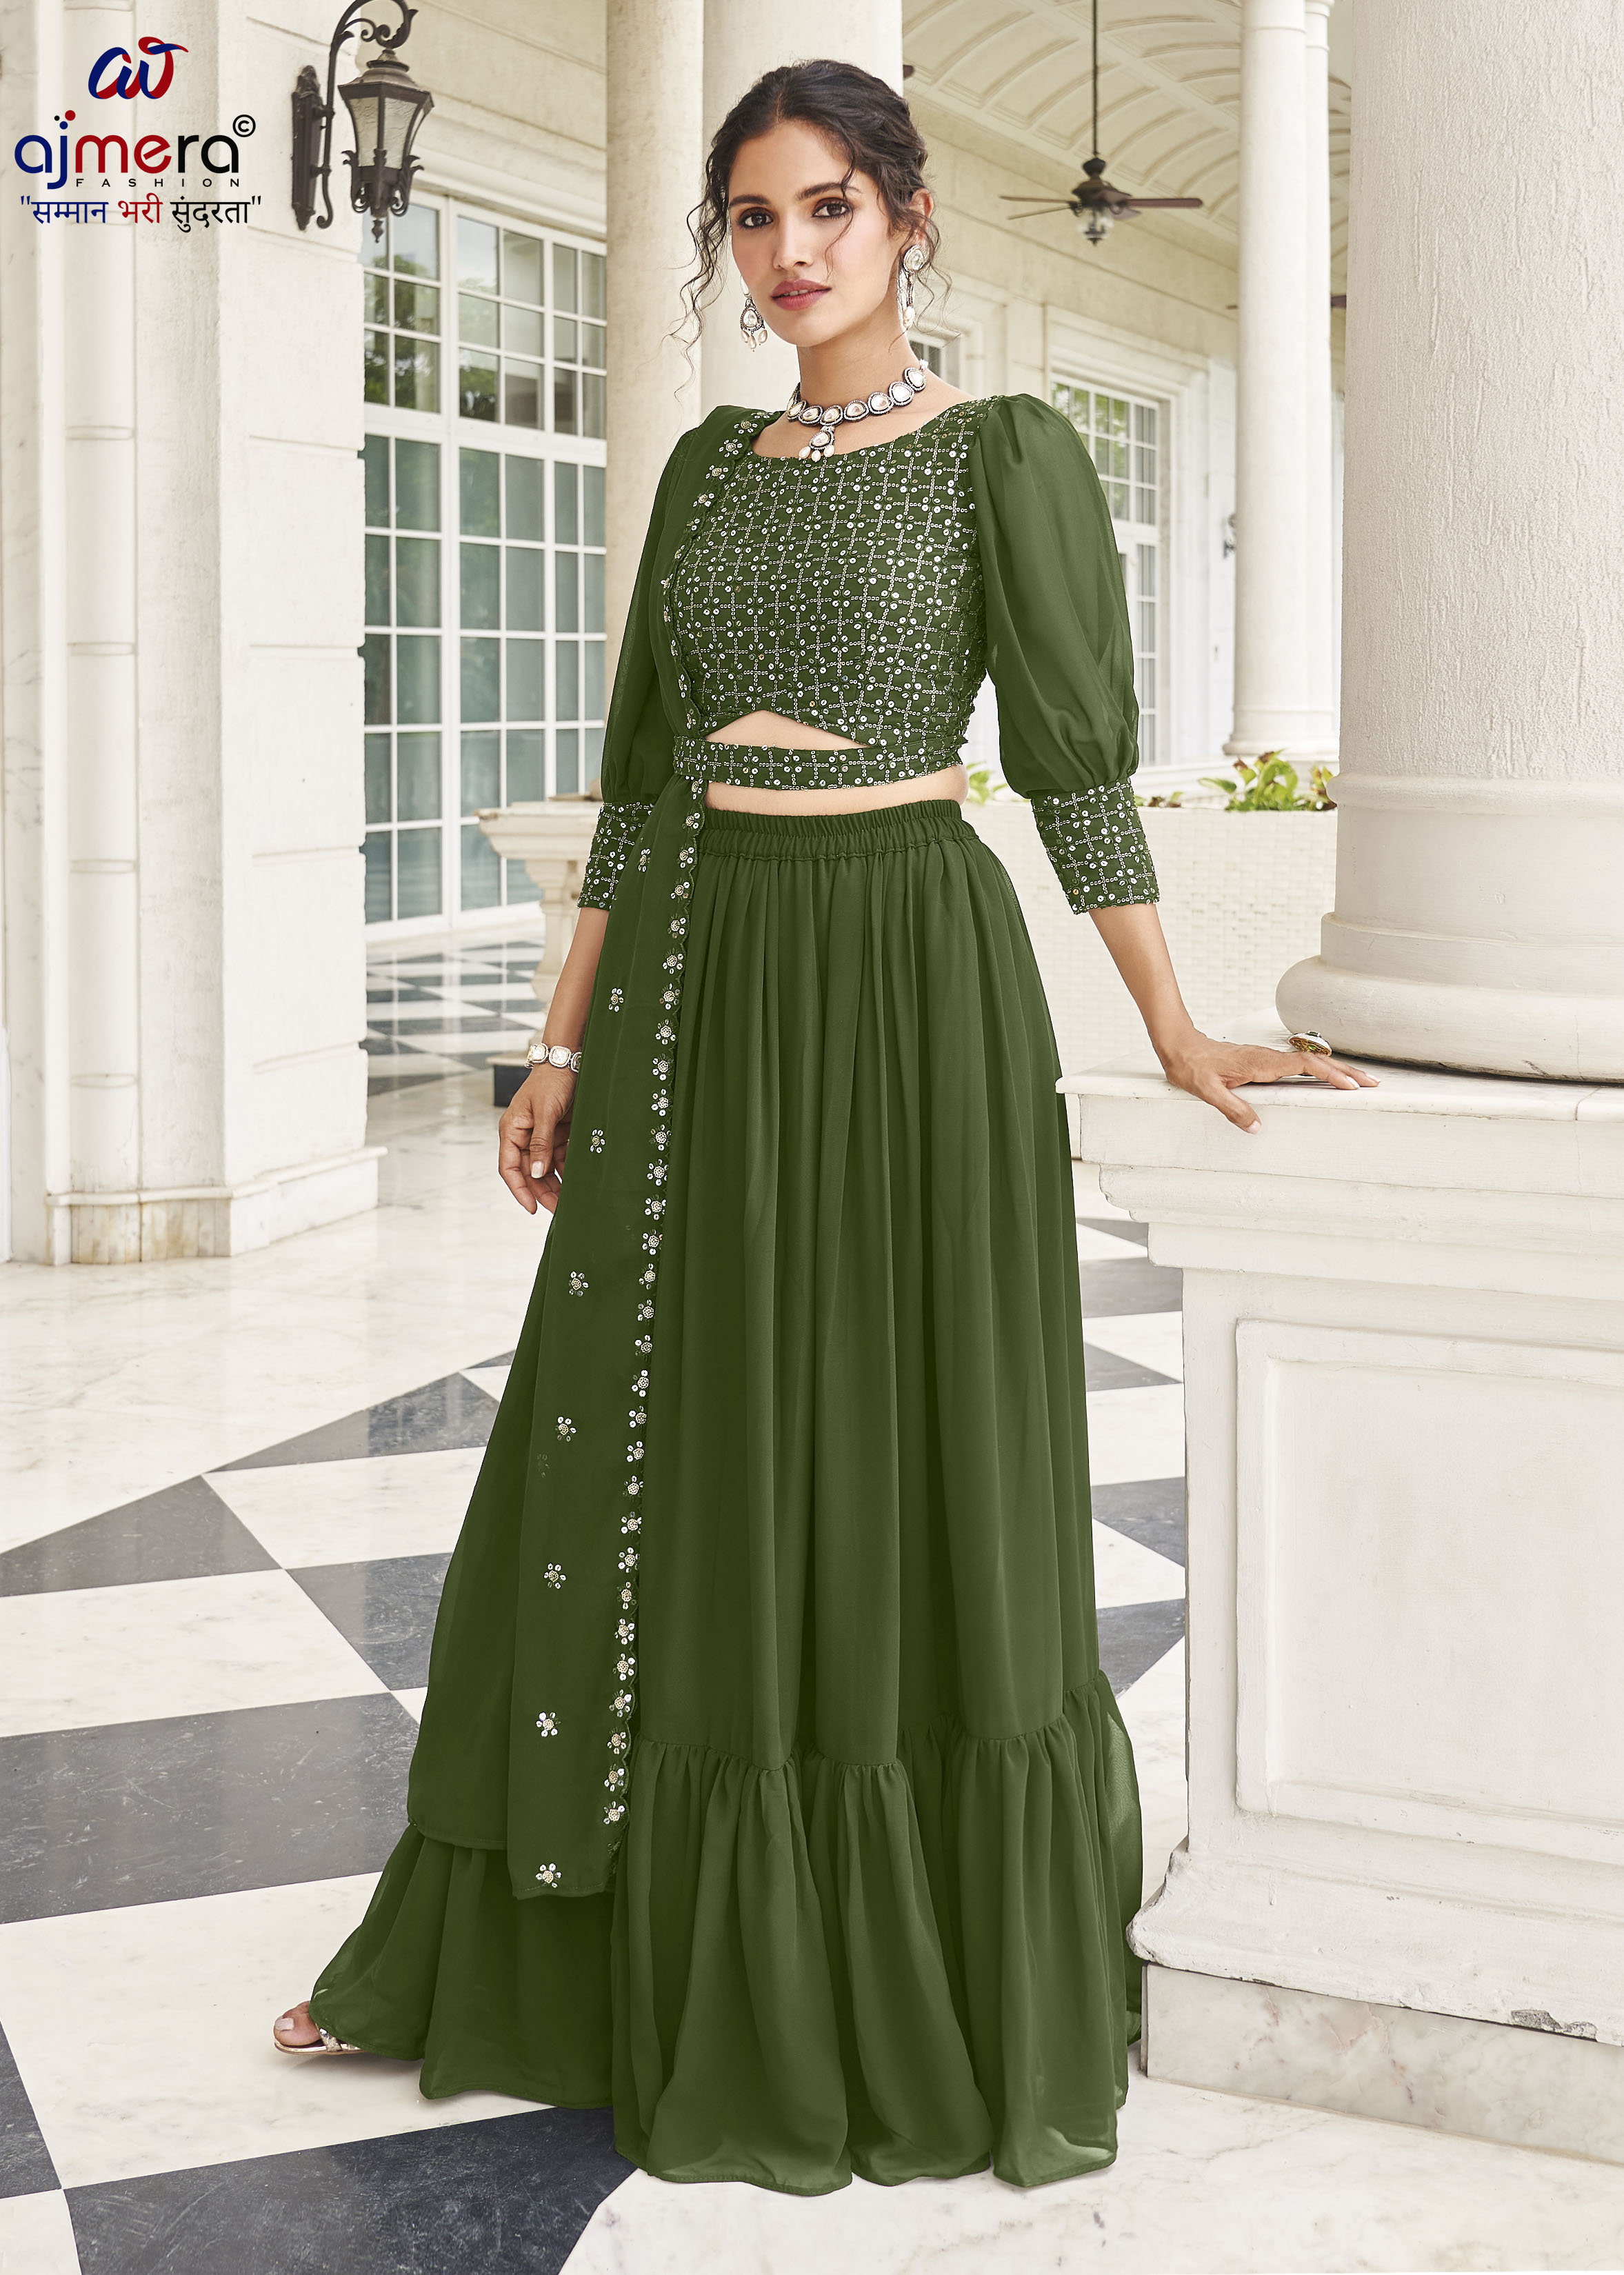 Partywear Lahenga Manufacturers, Suppliers in Patna